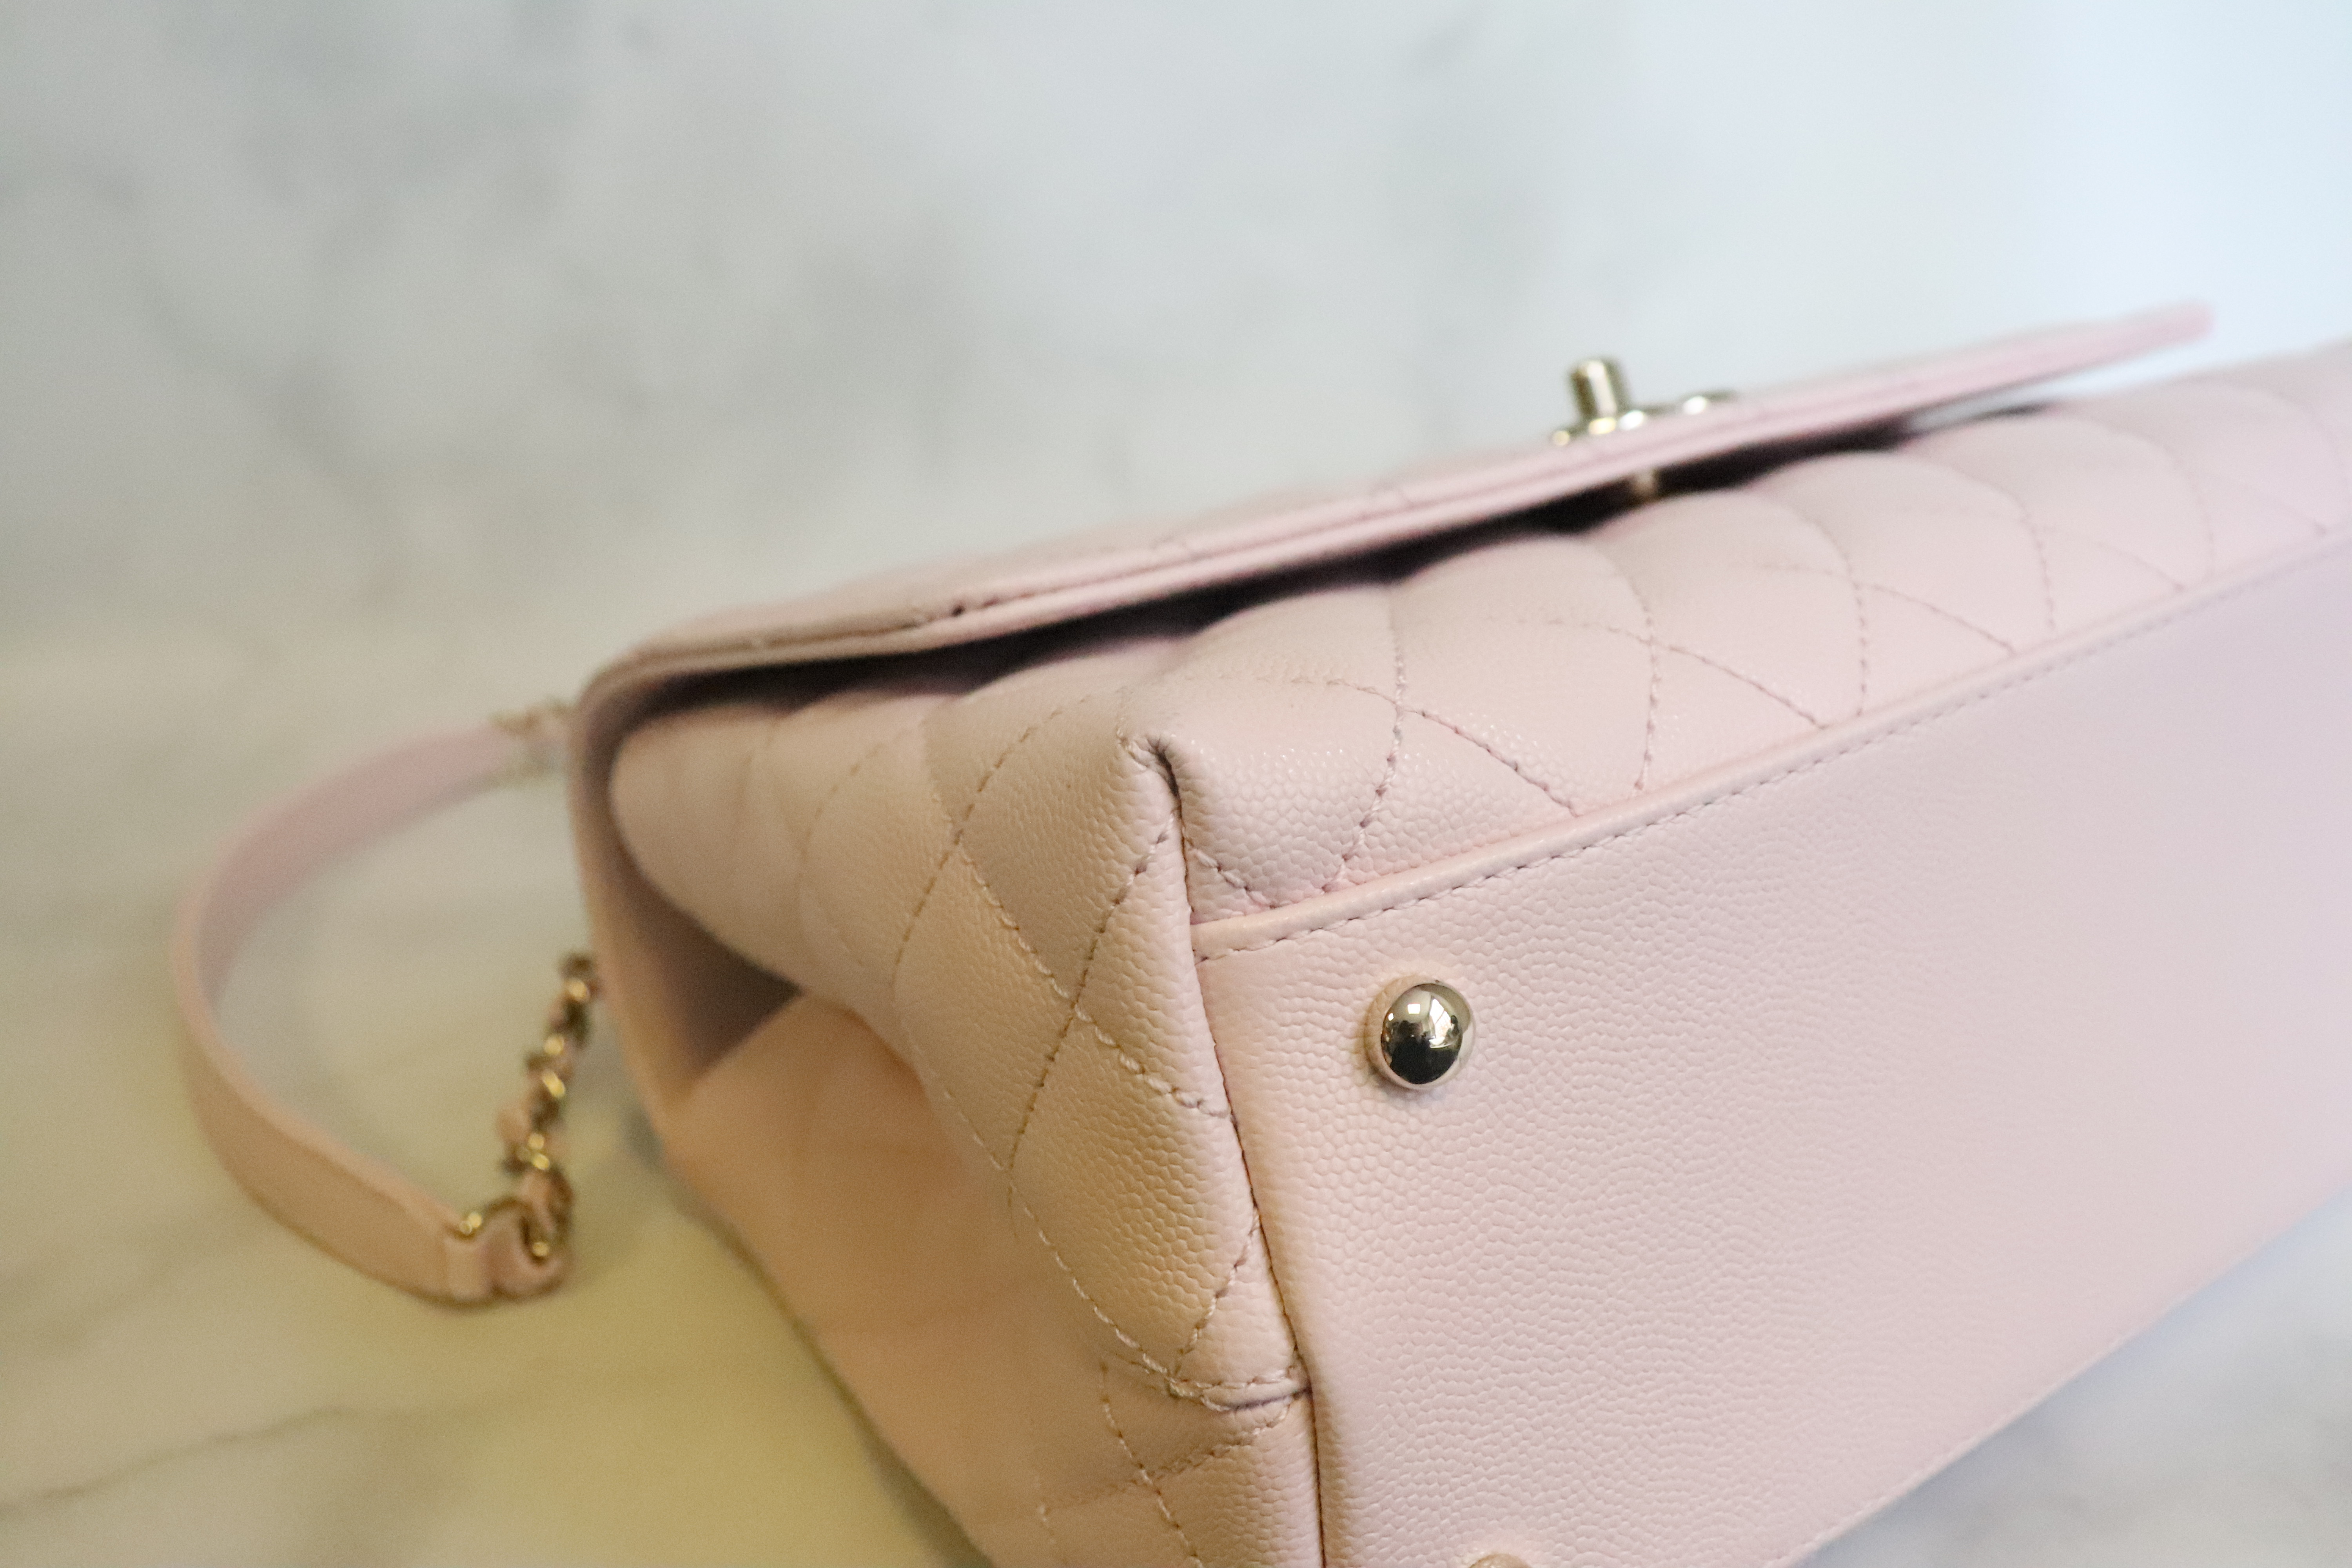 Coco handle leather handbag Chanel Pink in Leather - 29863293